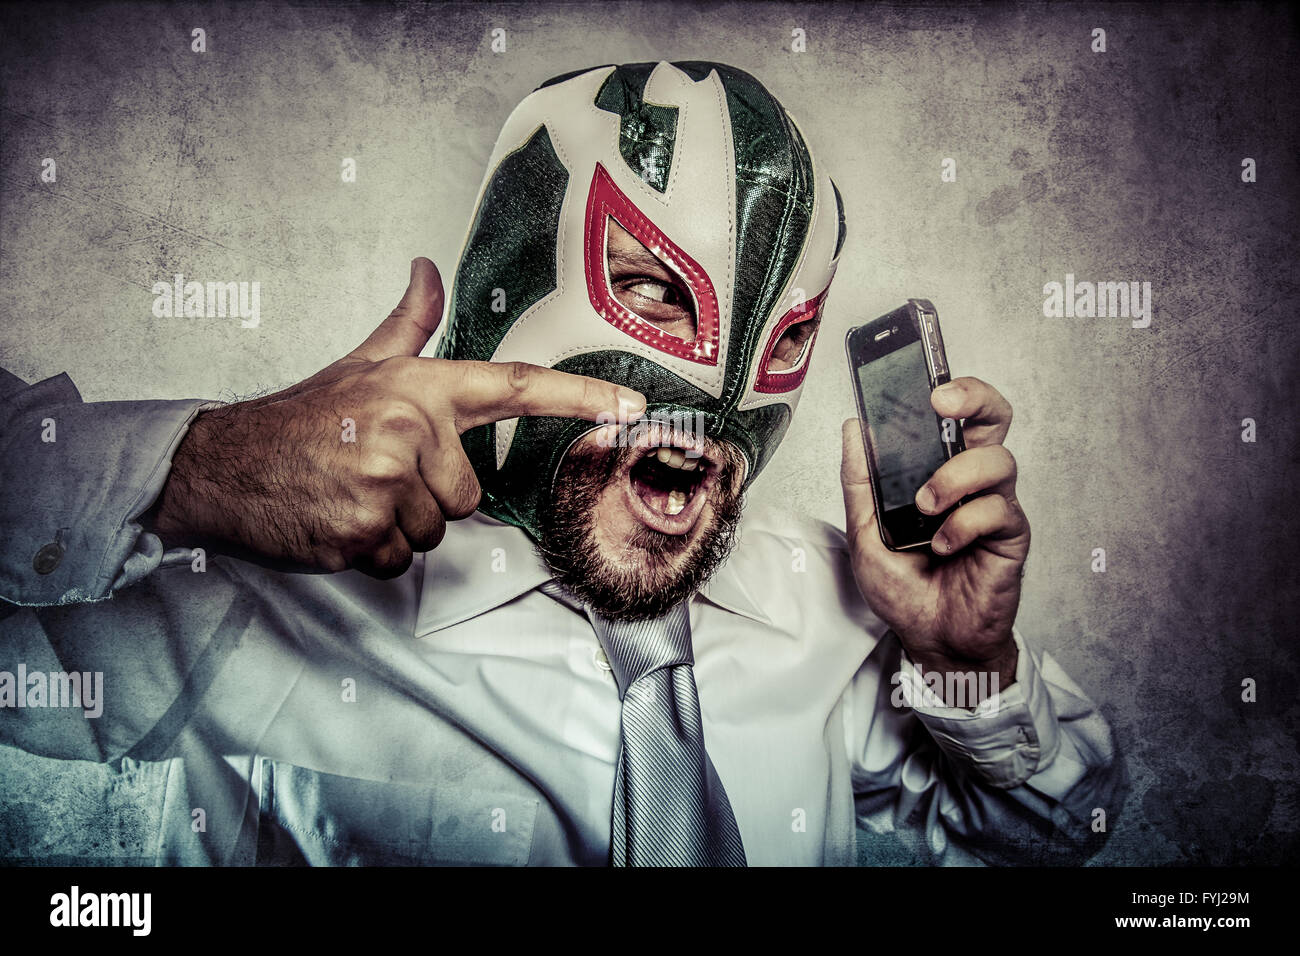 man arguing by phone, aggressive executive suit and tie, Mexican wrestler mask Stock Photo